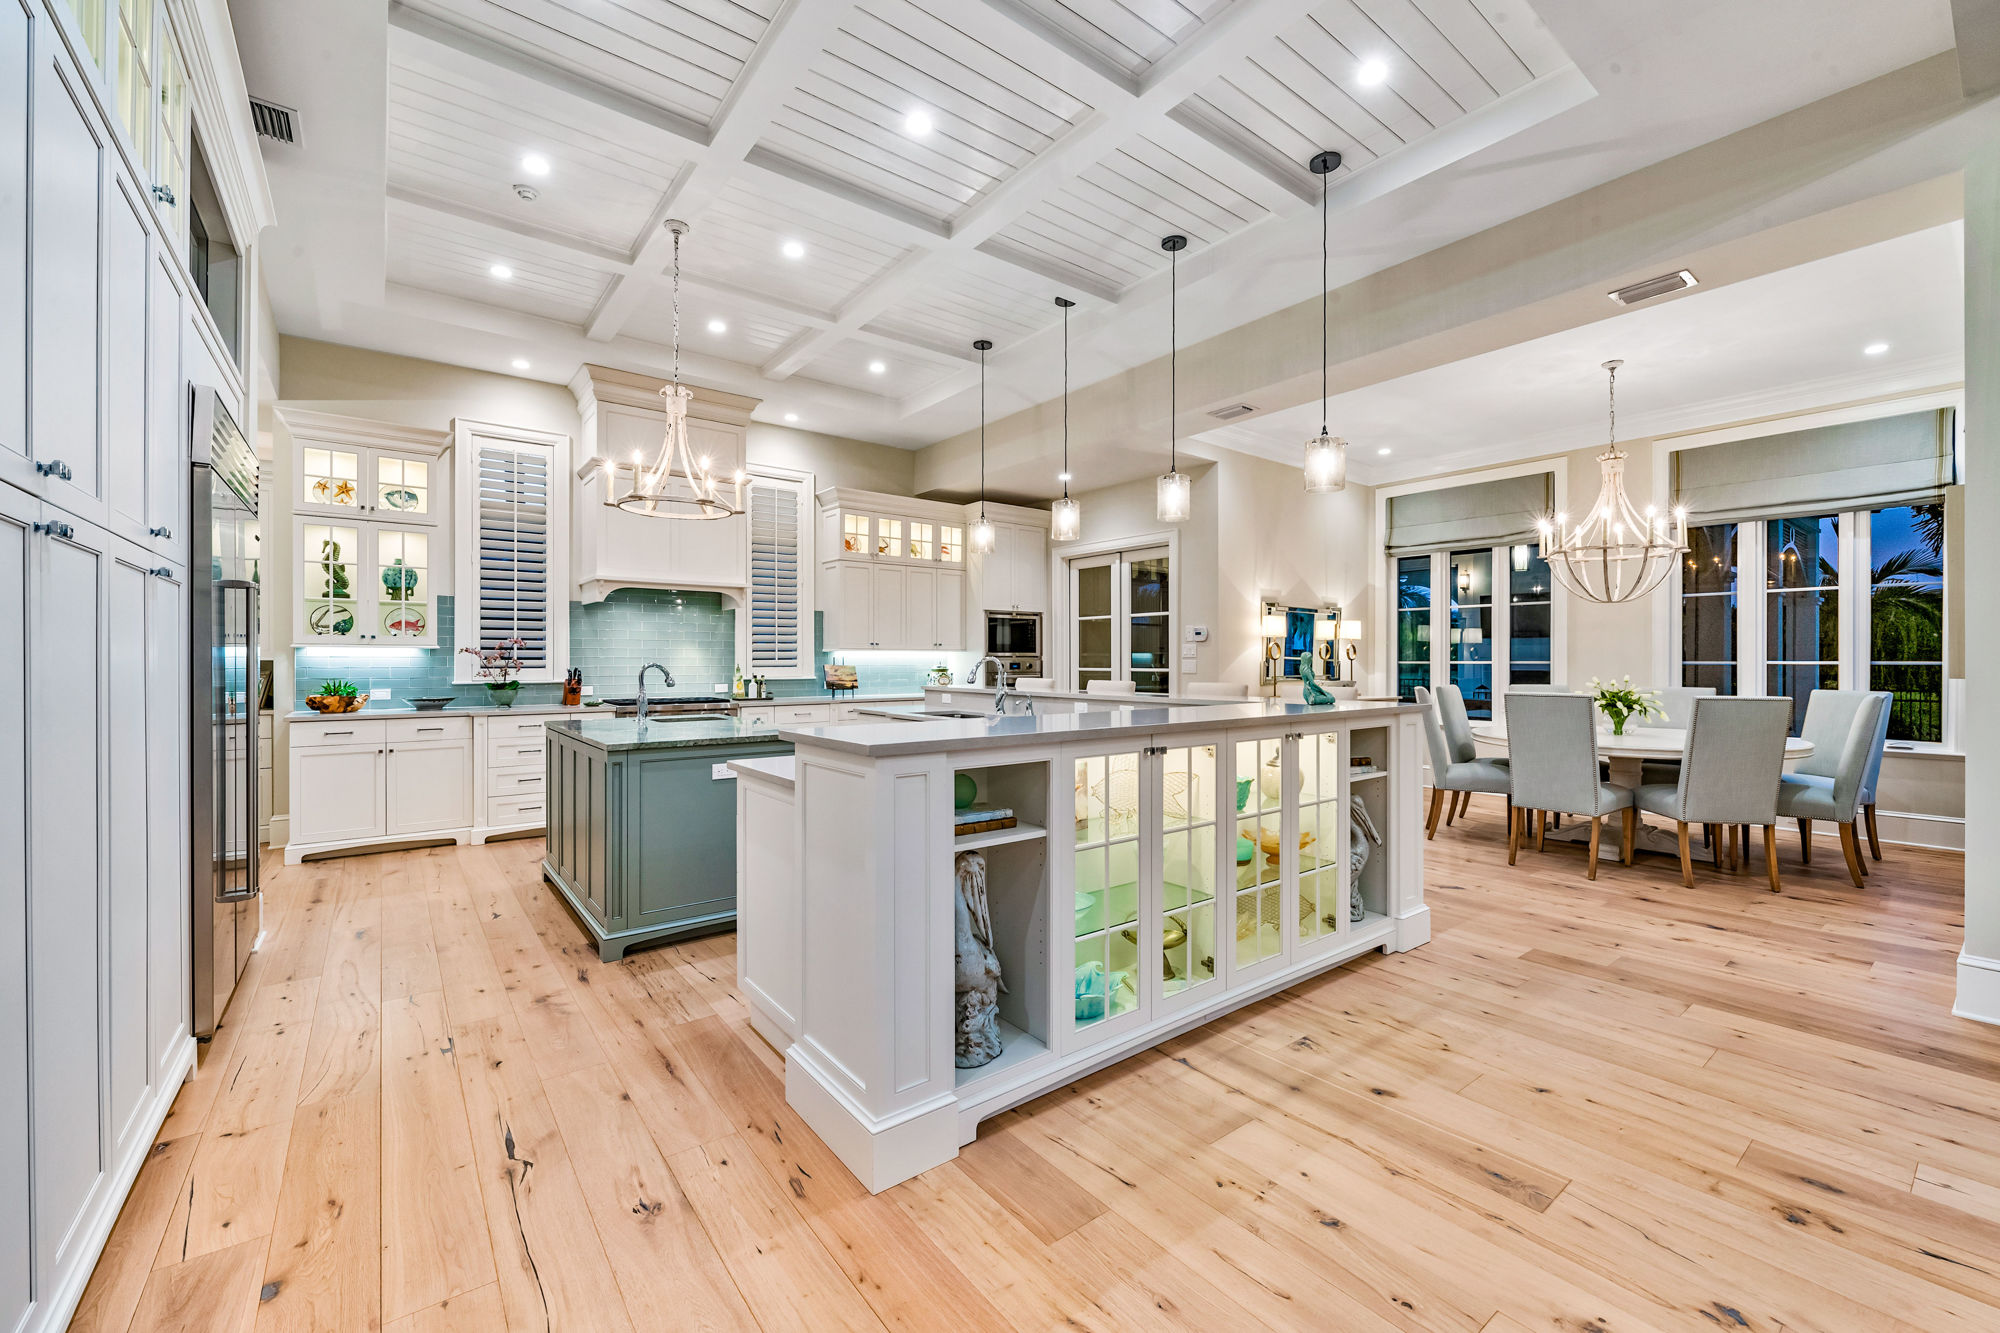 Cabinetry and kitchen islands were built to resemble furniture. A round dining table overlooks the pool, and to the left, a wall of built-ins provides extra storage.